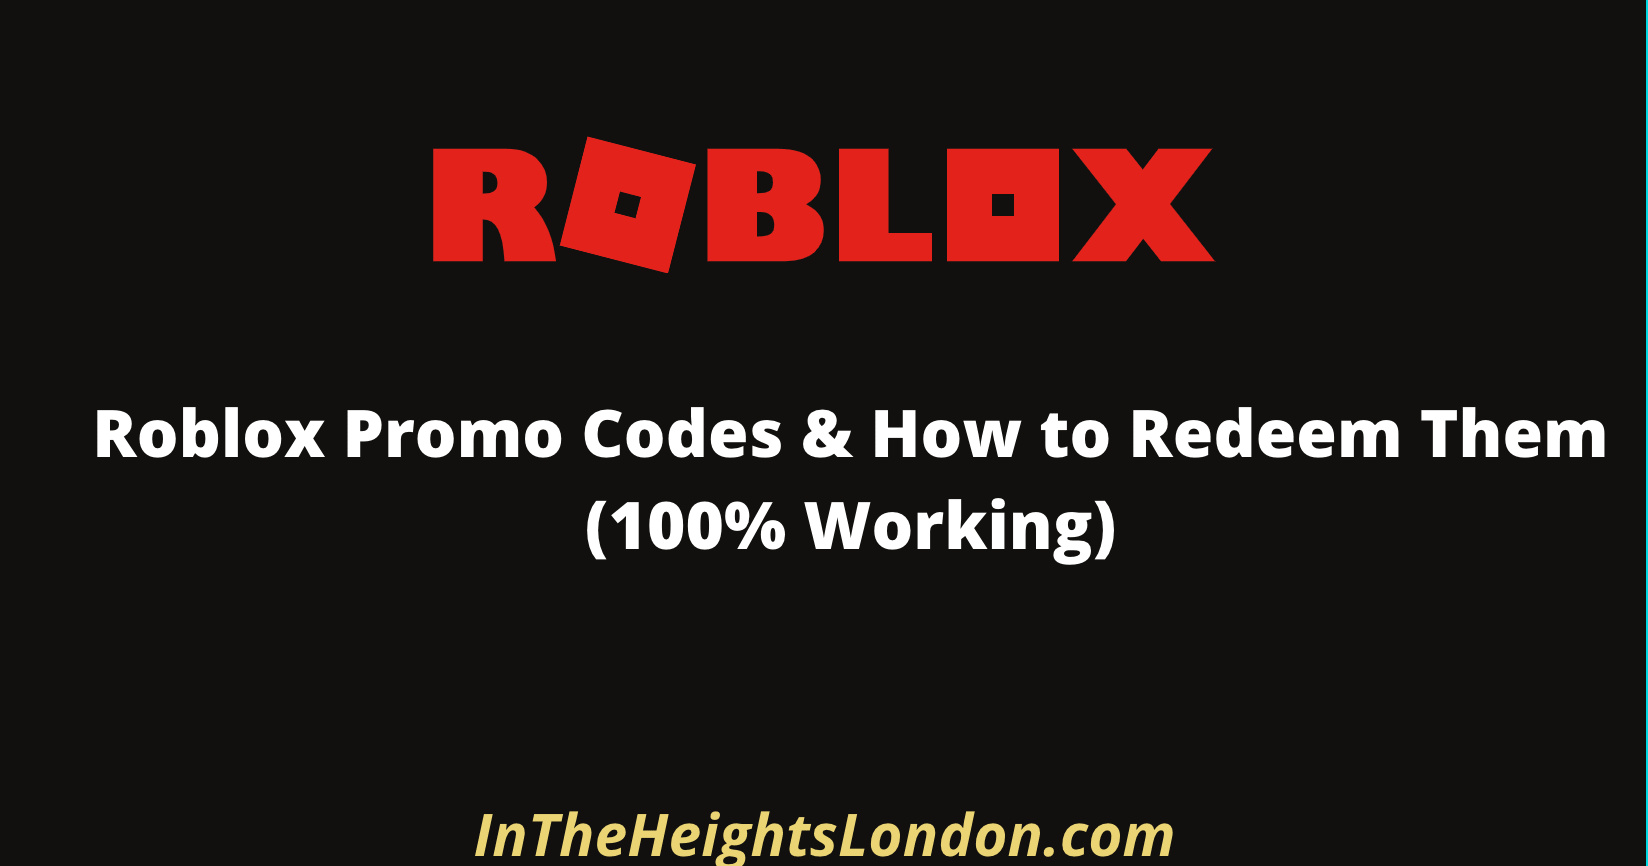 Roblox Promo Codes How To Redeem April 2021 - where to redeem promo codes in roblox